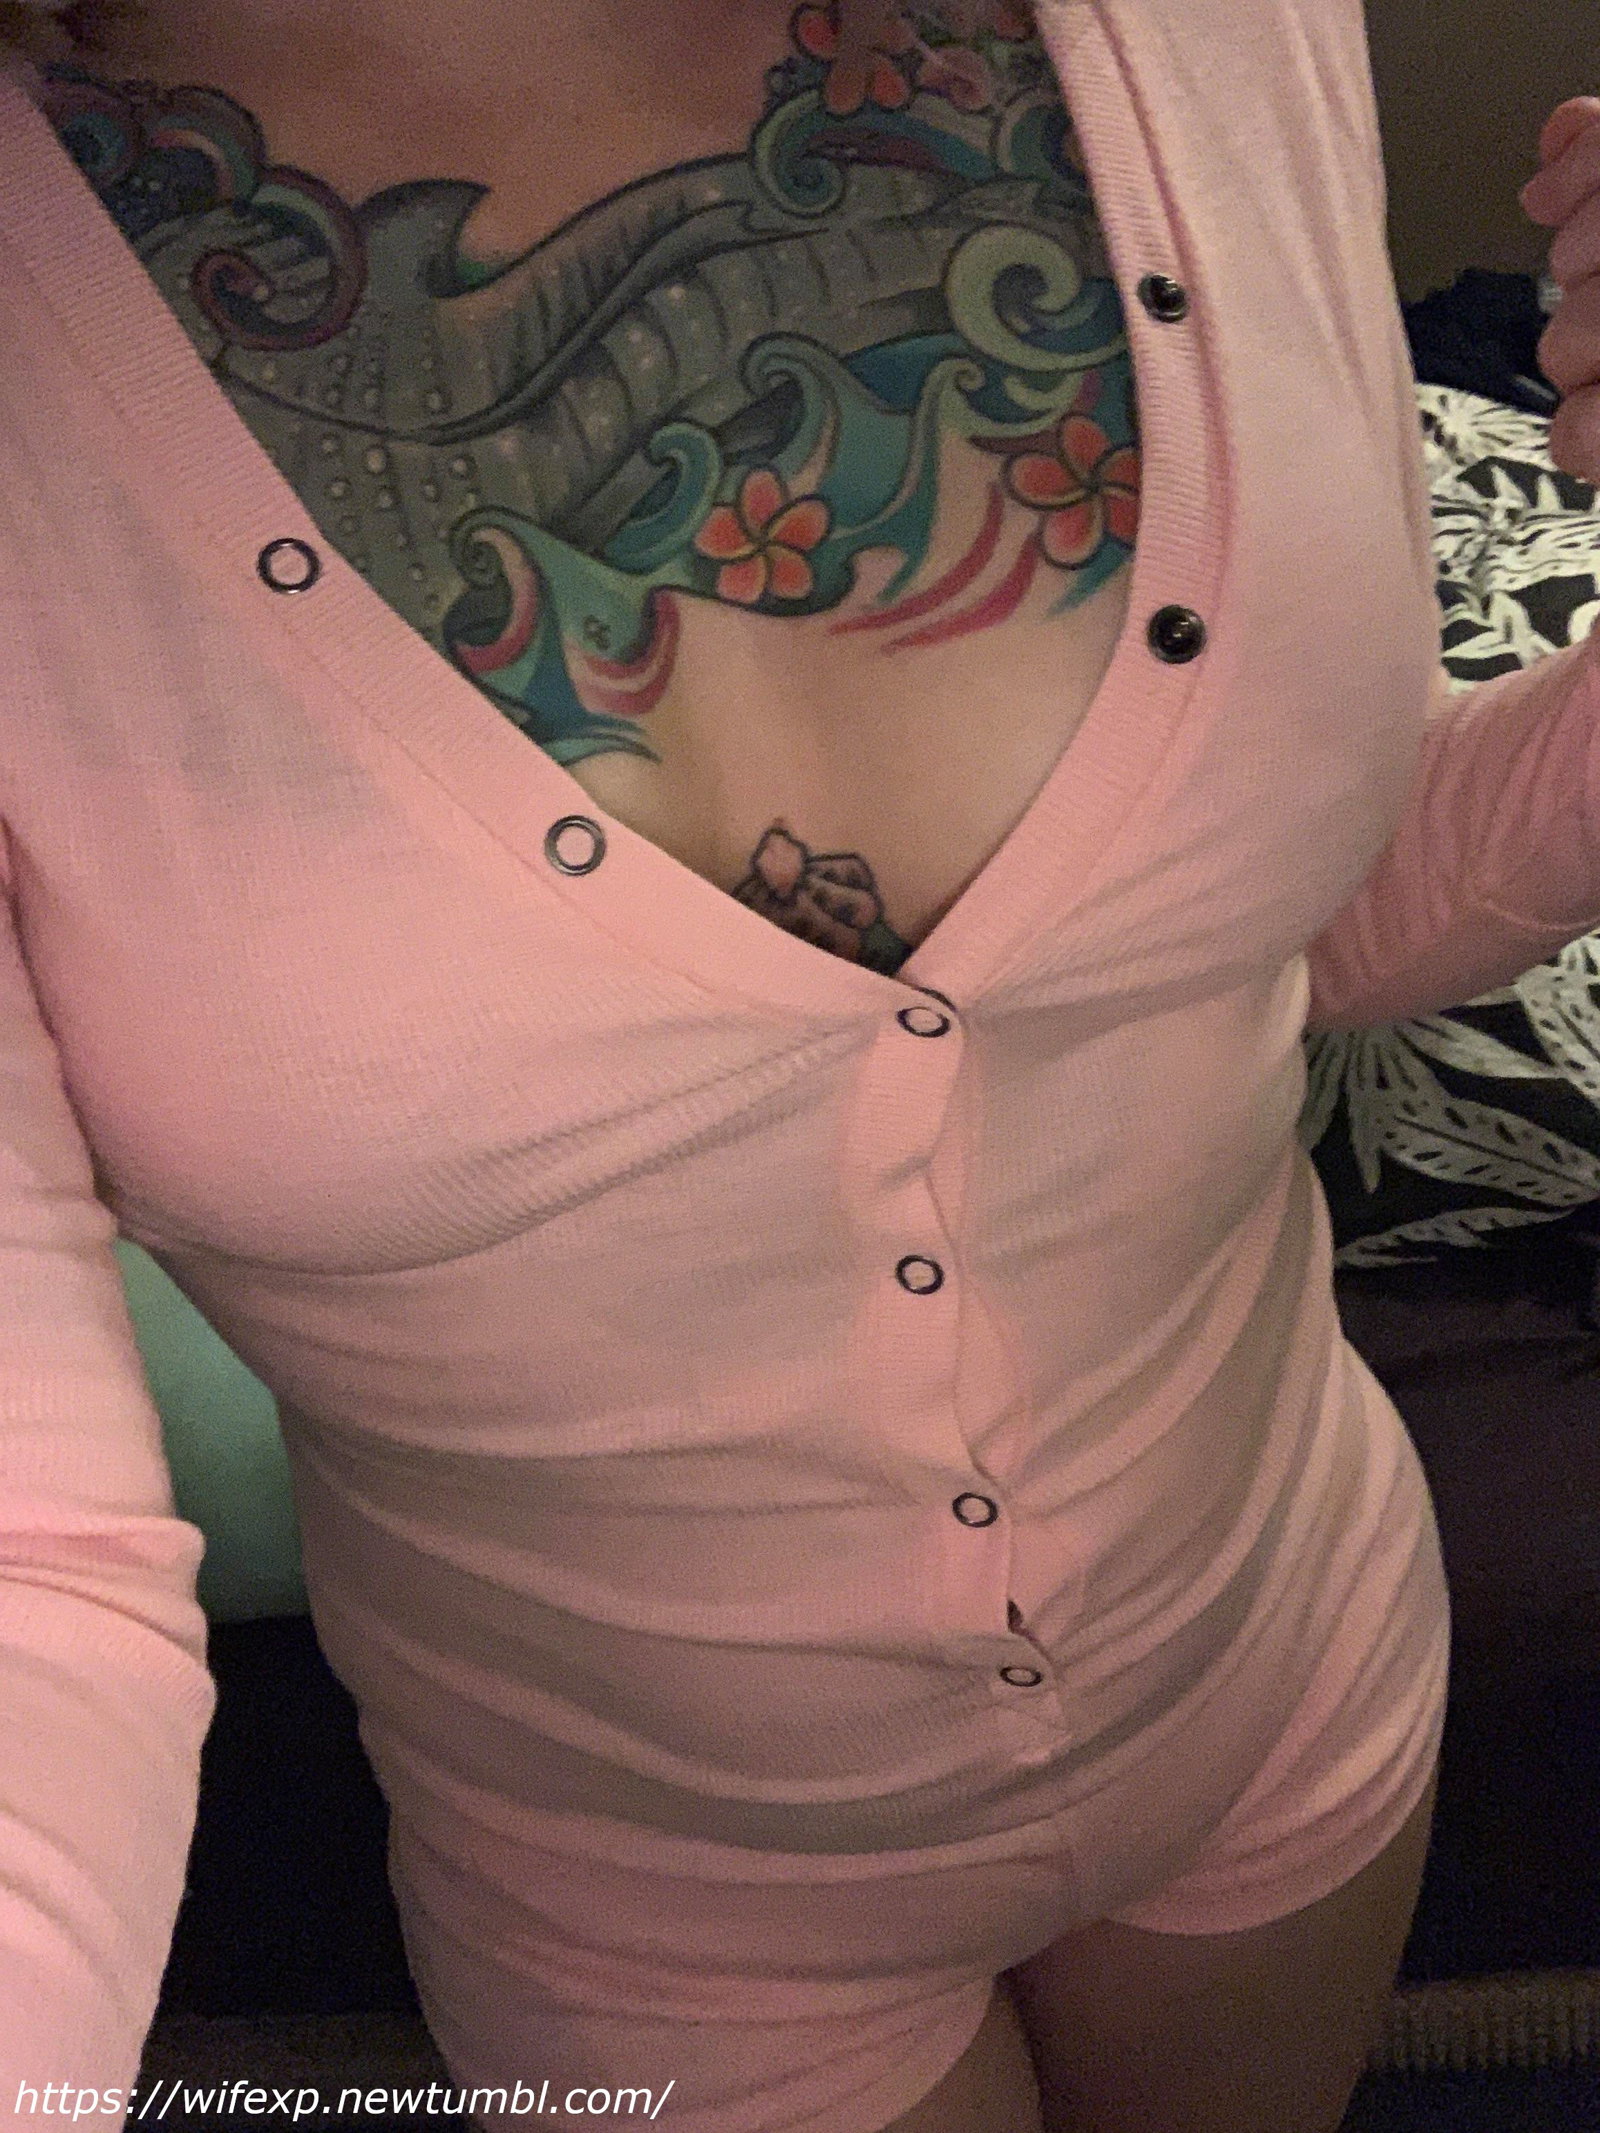 Photo by wifexp with the username @wifexp,  March 30, 2020 at 11:08 AM. The post is about the topic Stag/Vixen and the text says 'You should see her back side!  

#wife #wifexp #amateur #homemade #selfie #tits #boobs  #tattoo #tattoos #onsie #vixen #NSFW'